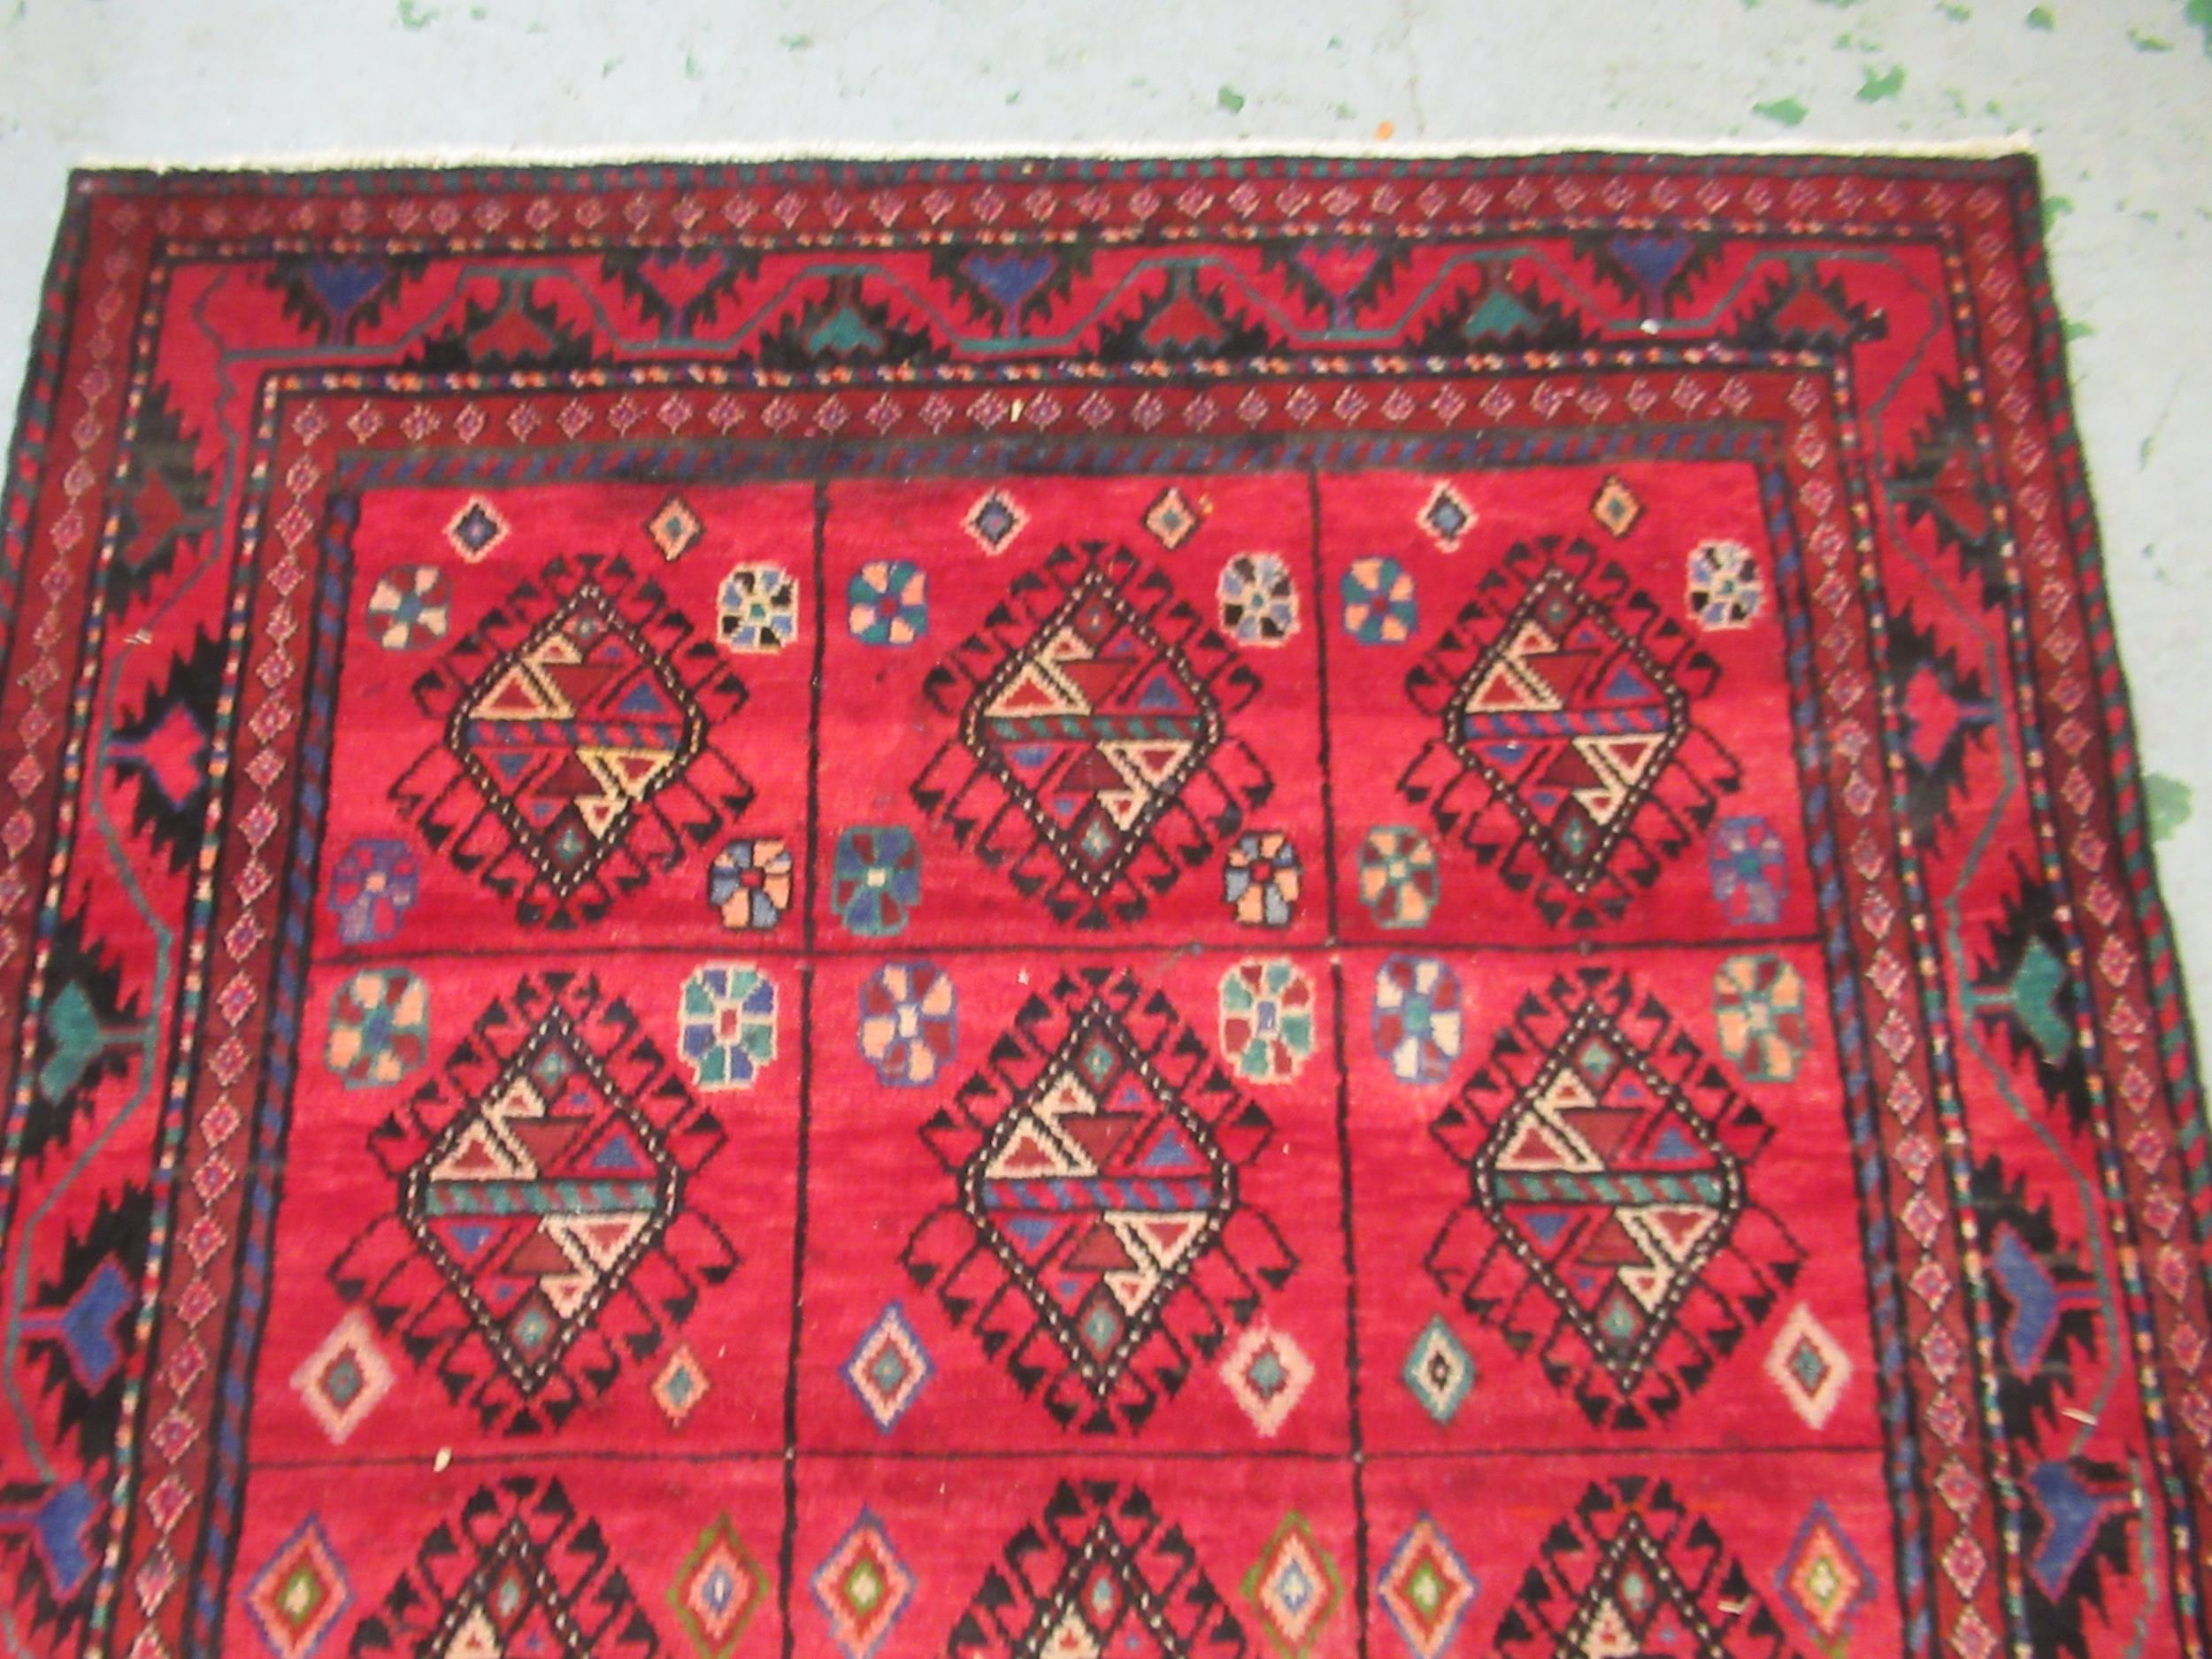 Modern Belouch style rug with an all over hooked medallion and panel design on a red ground with - Image 3 of 5